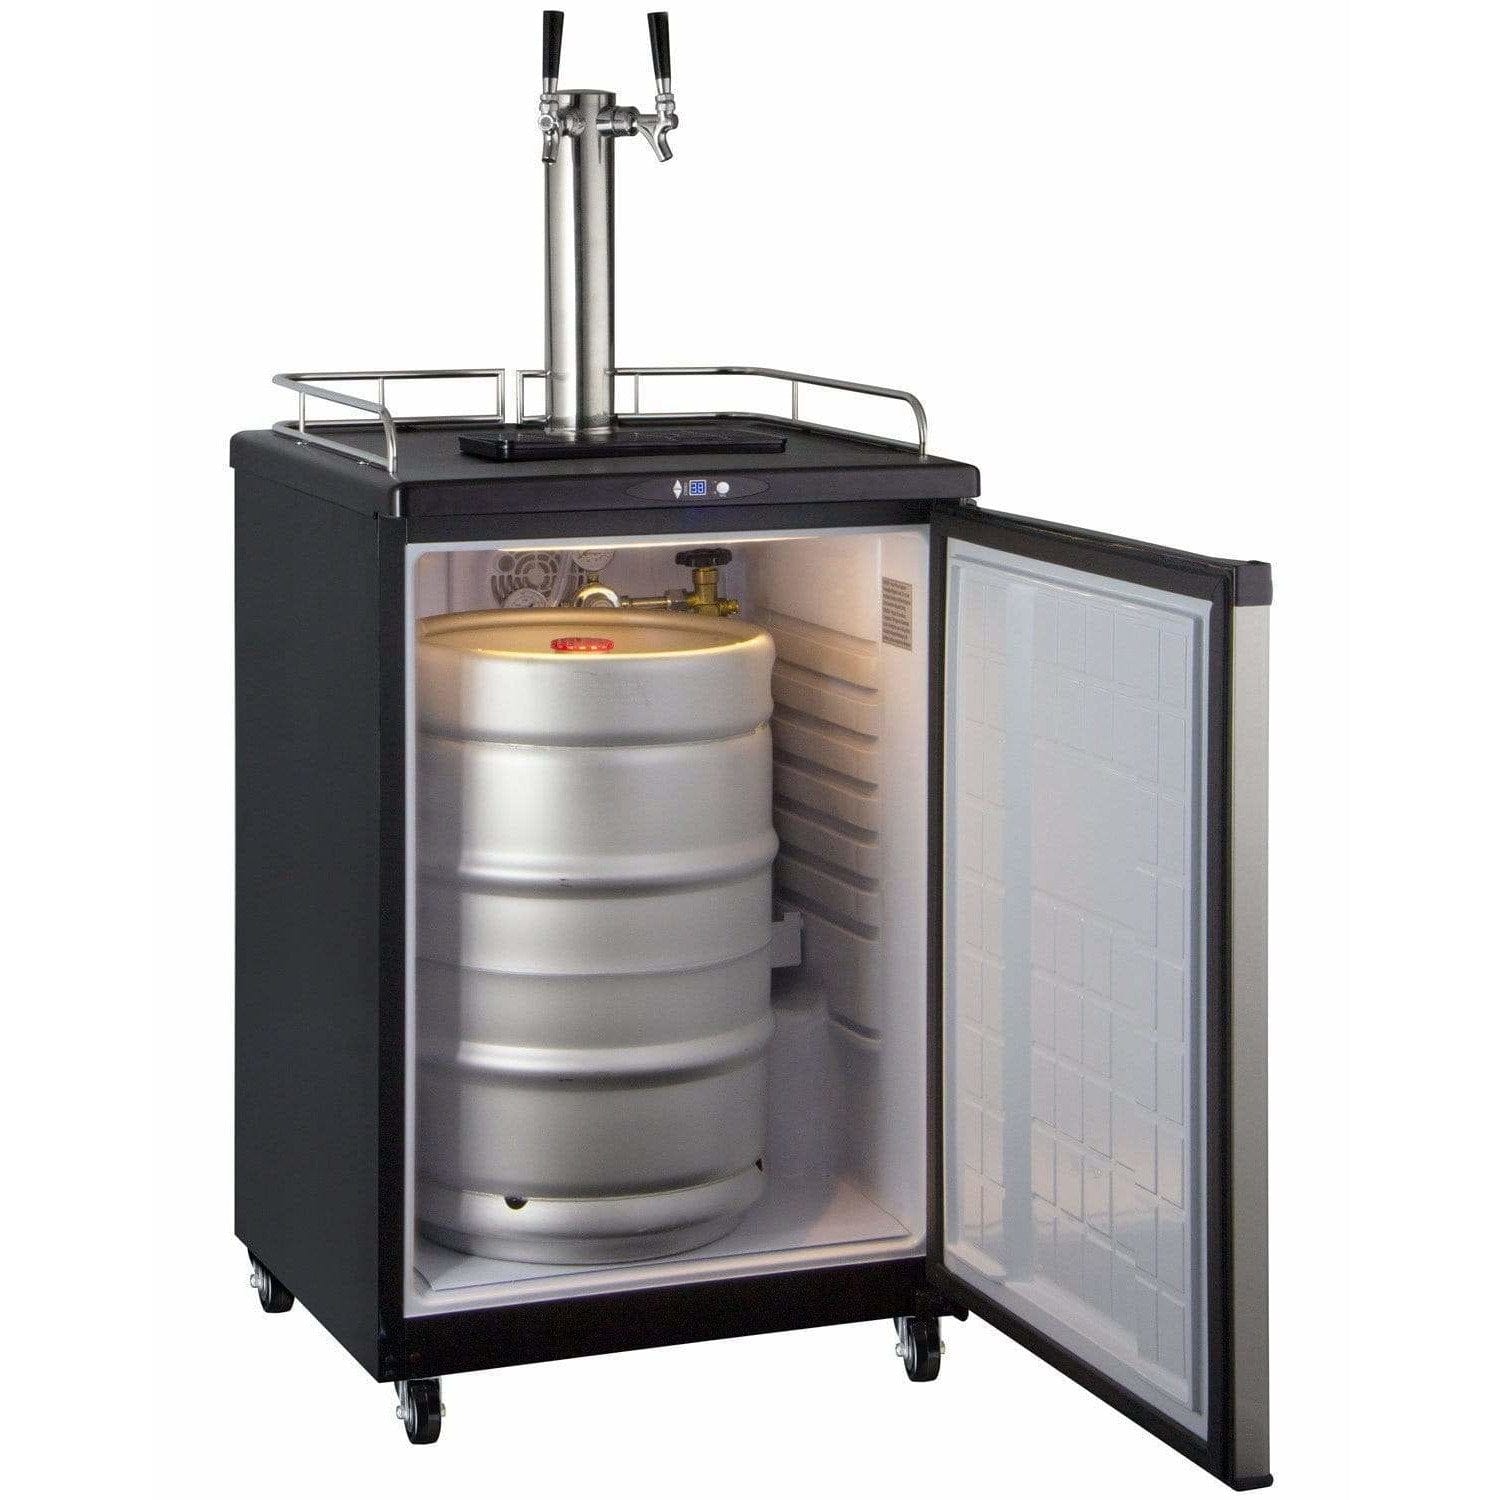 Kegco 24" Wide Dual Tap Stainless Steel Kegerator Z163S-2 Wine Coolers Empire